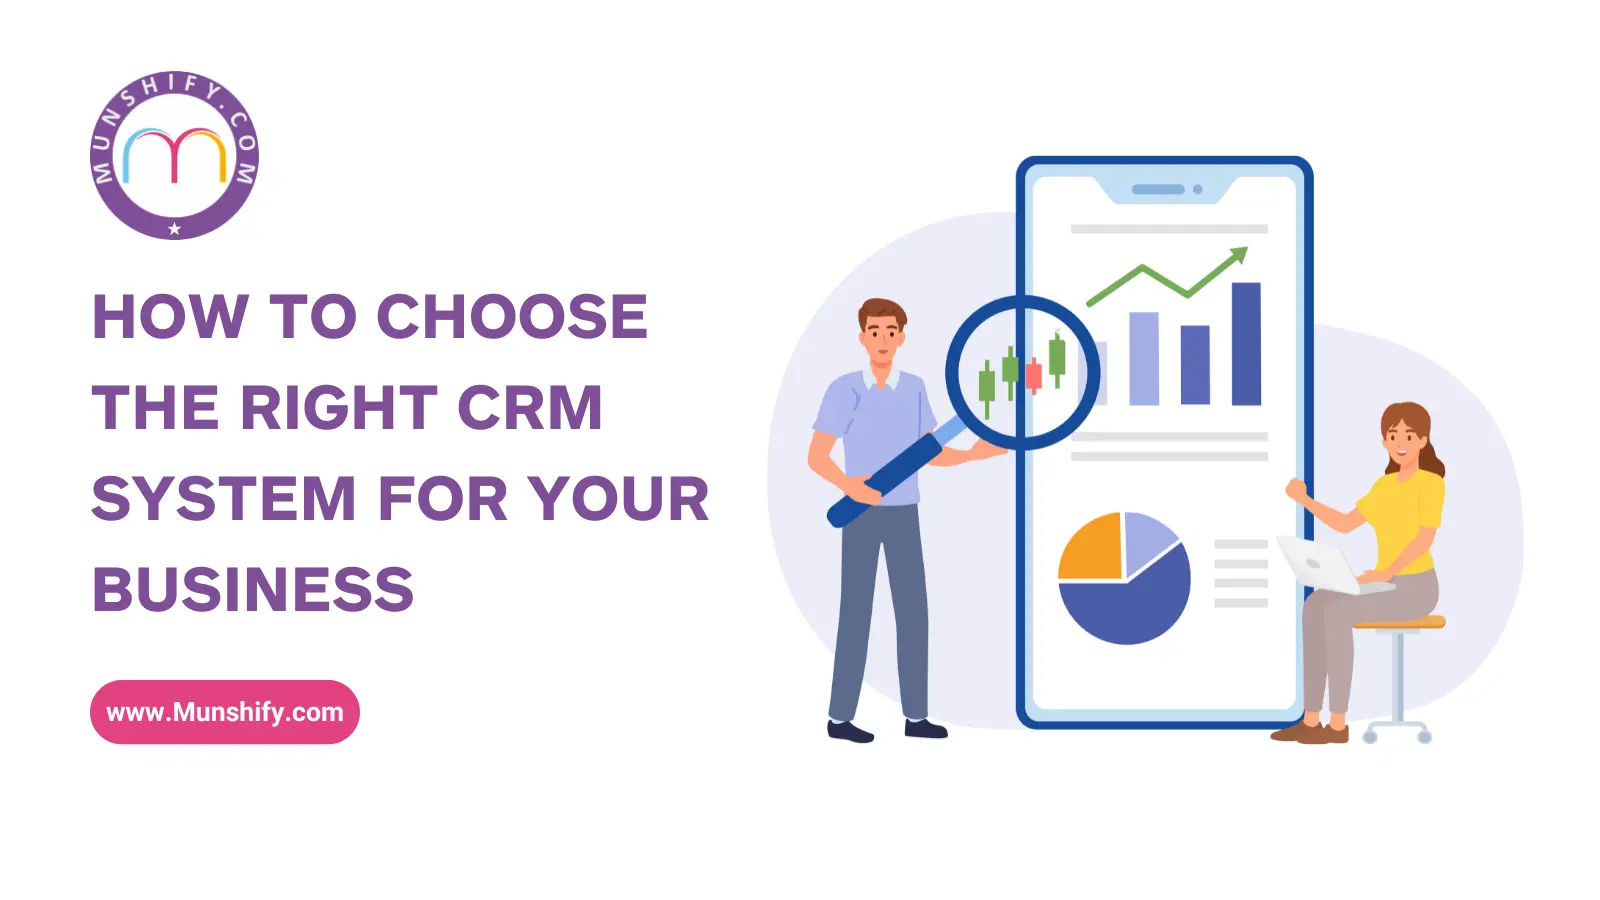 How to Choose the Right CRM System for Your Business